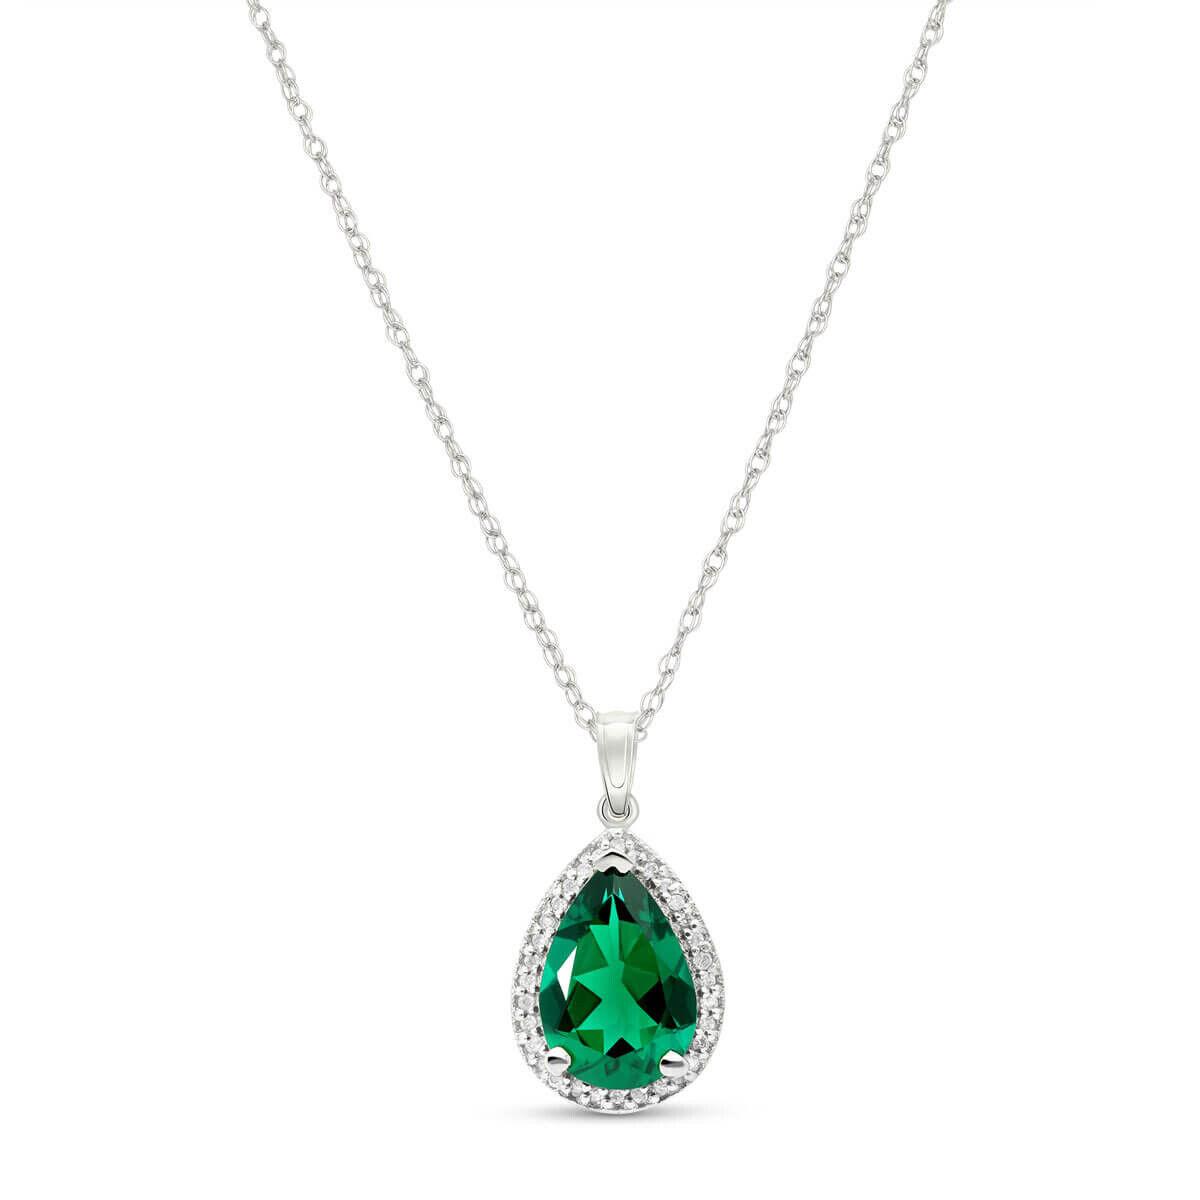 Tiffany & Co. 14K Solid White Gold Necklace with Natural Diamonds and Emerald 3.16 Ctw